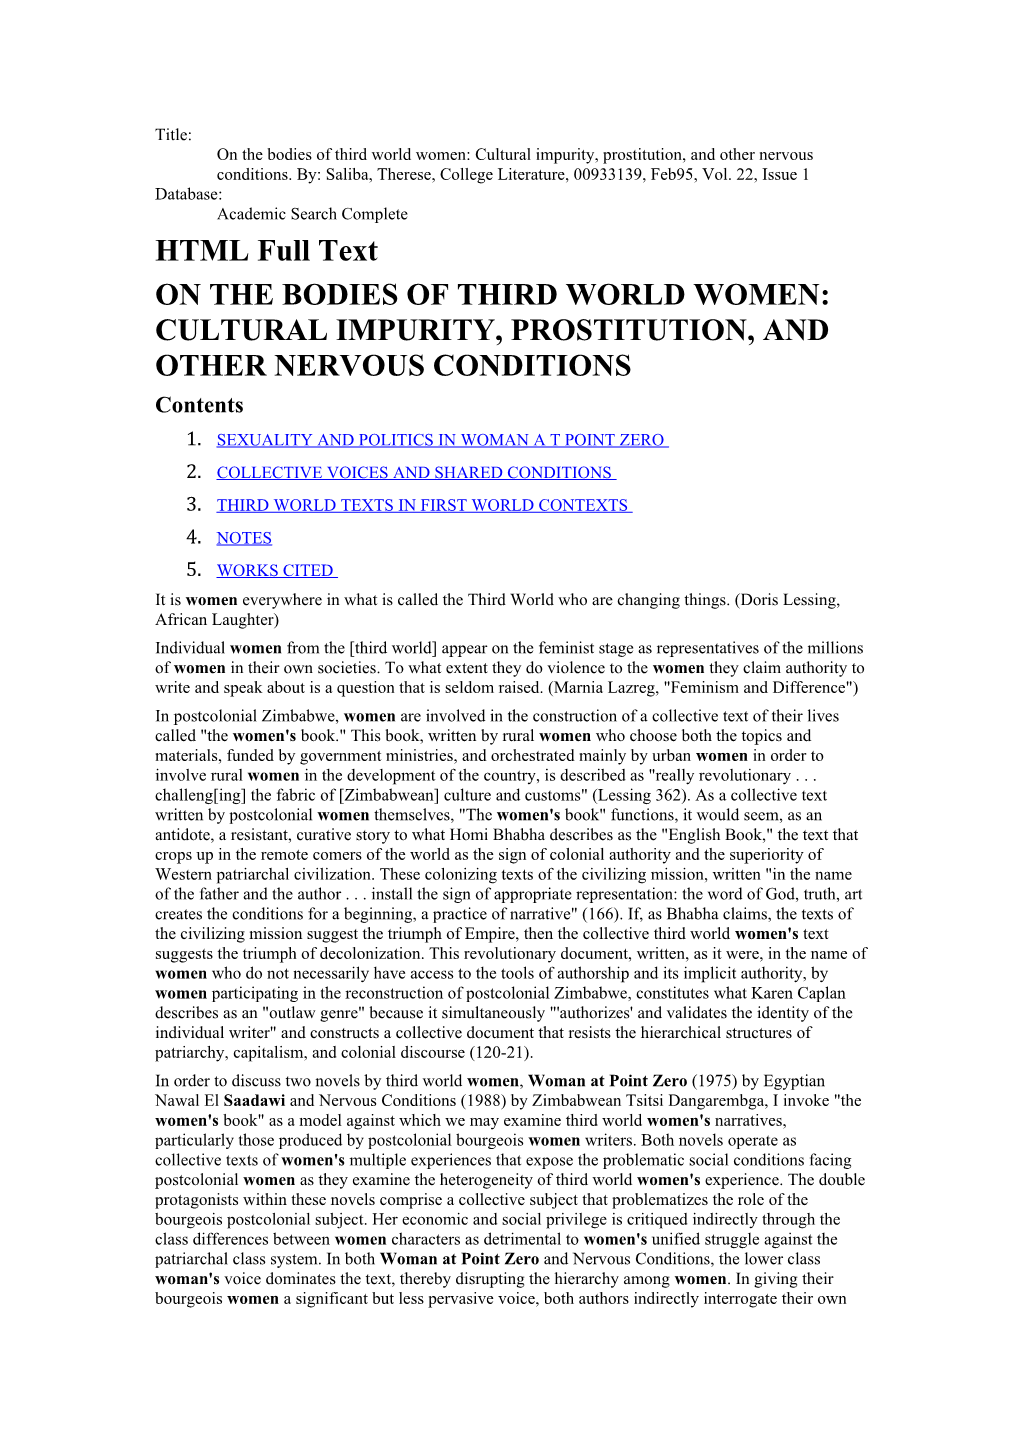 On the Bodies of Third World Women: Cultural Impurity, Prostitution, and Other Nervous